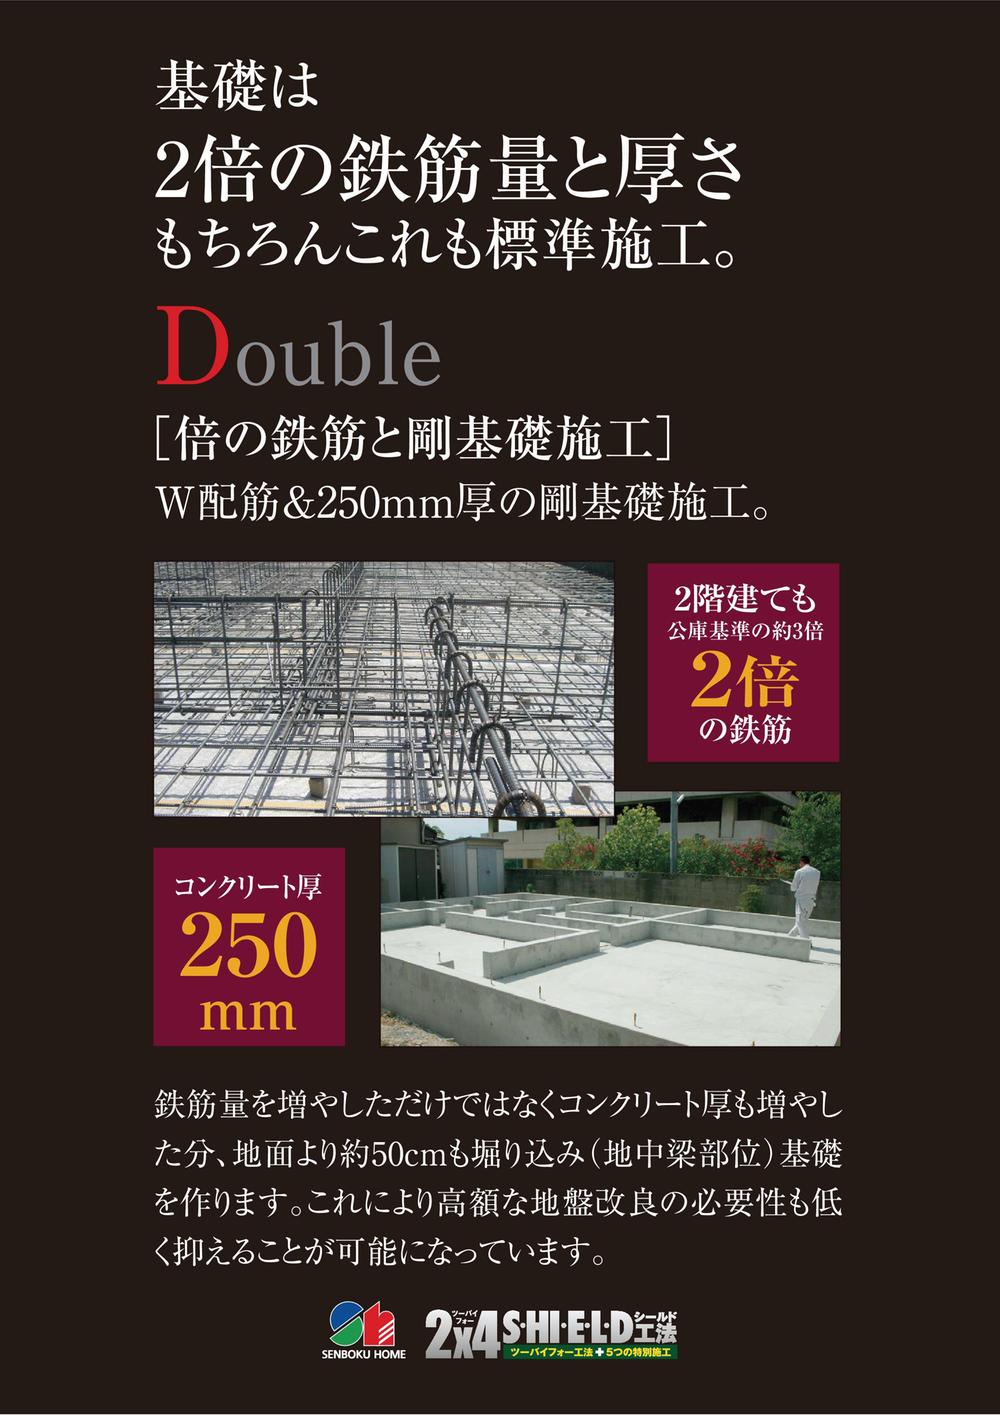 Construction ・ Construction method ・ specification. W reinforcement and 250 mm thickness of the rigid foundation construction